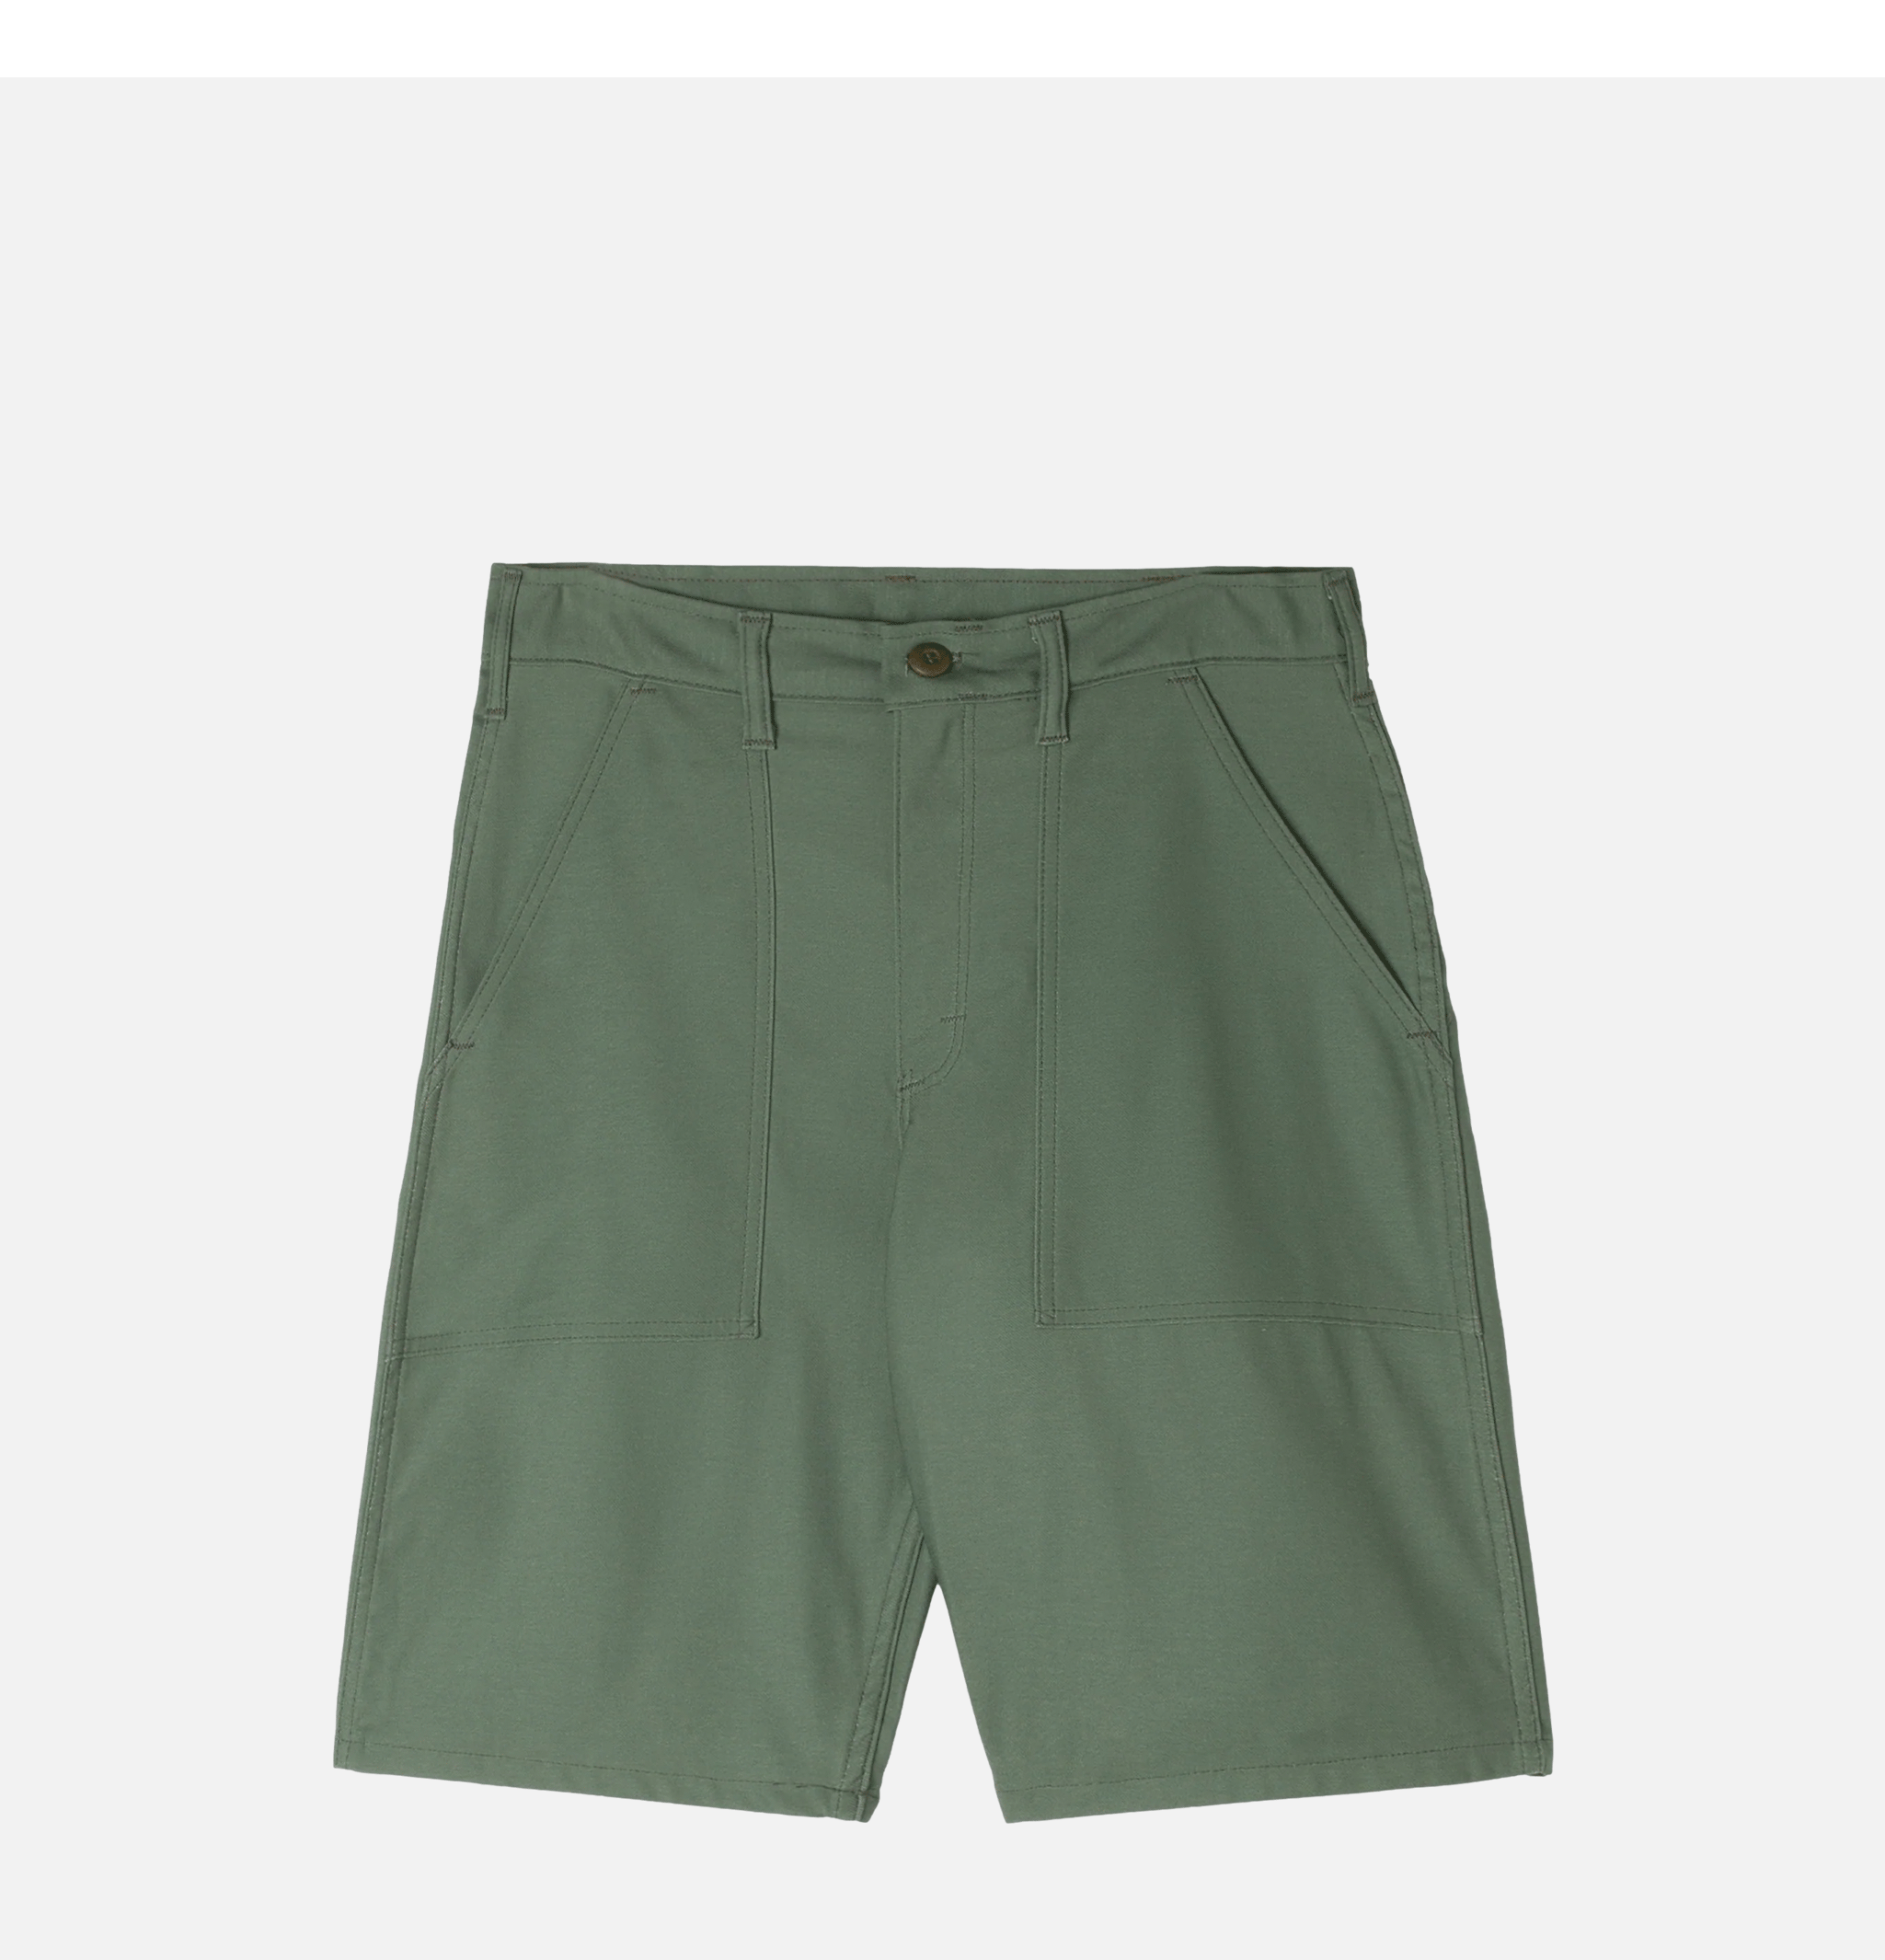 Stan Ray USA Fatigue Short Olive